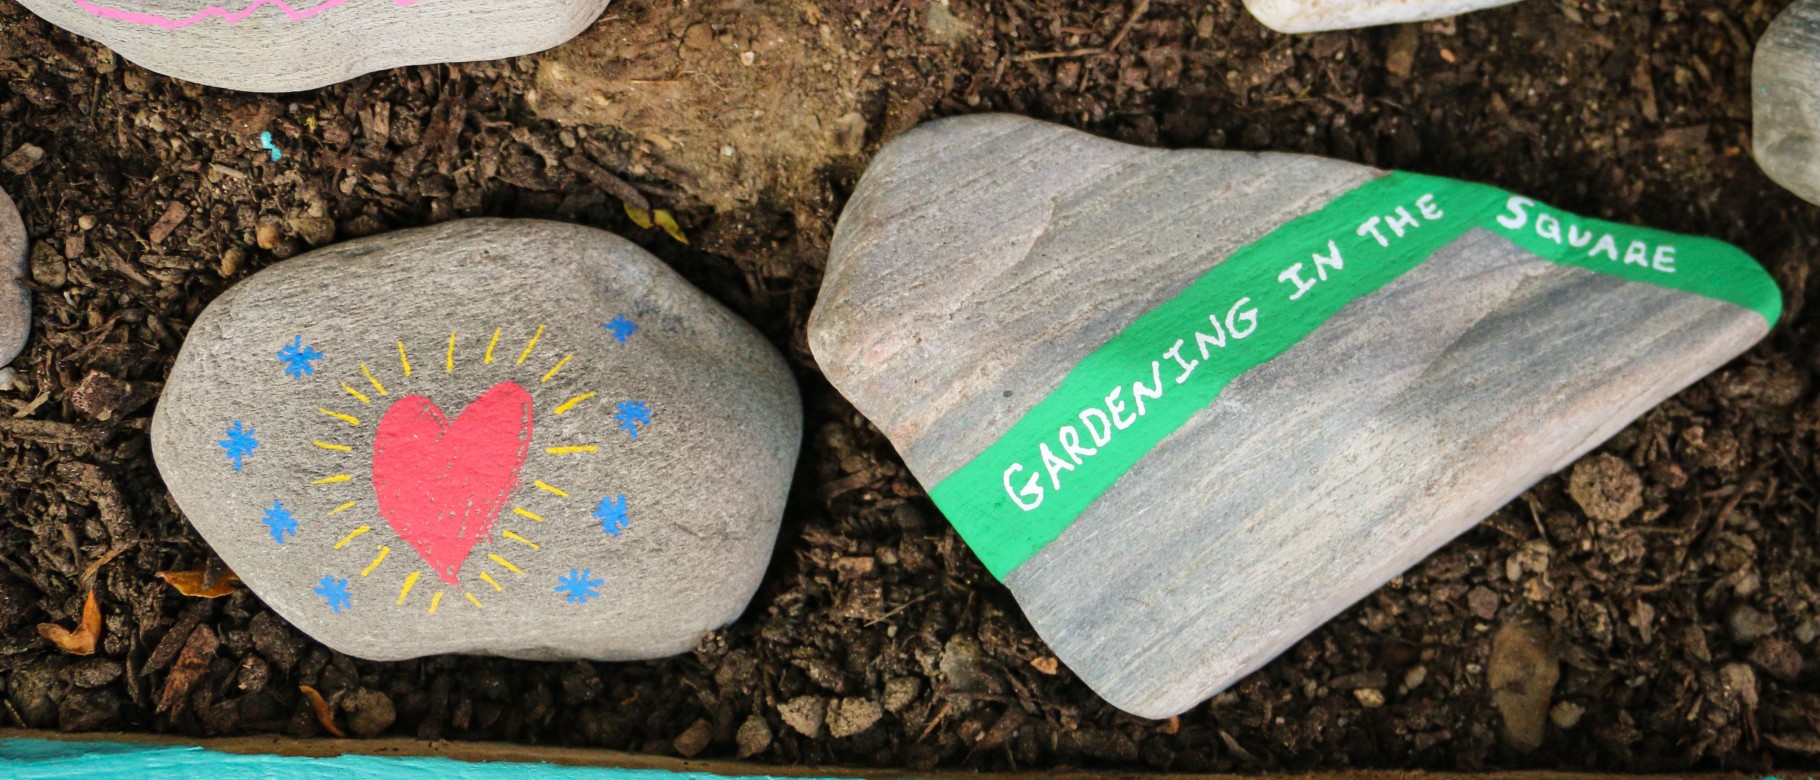 Painted rocks are set in an intergenerational garden set up by two UNE Social Work students